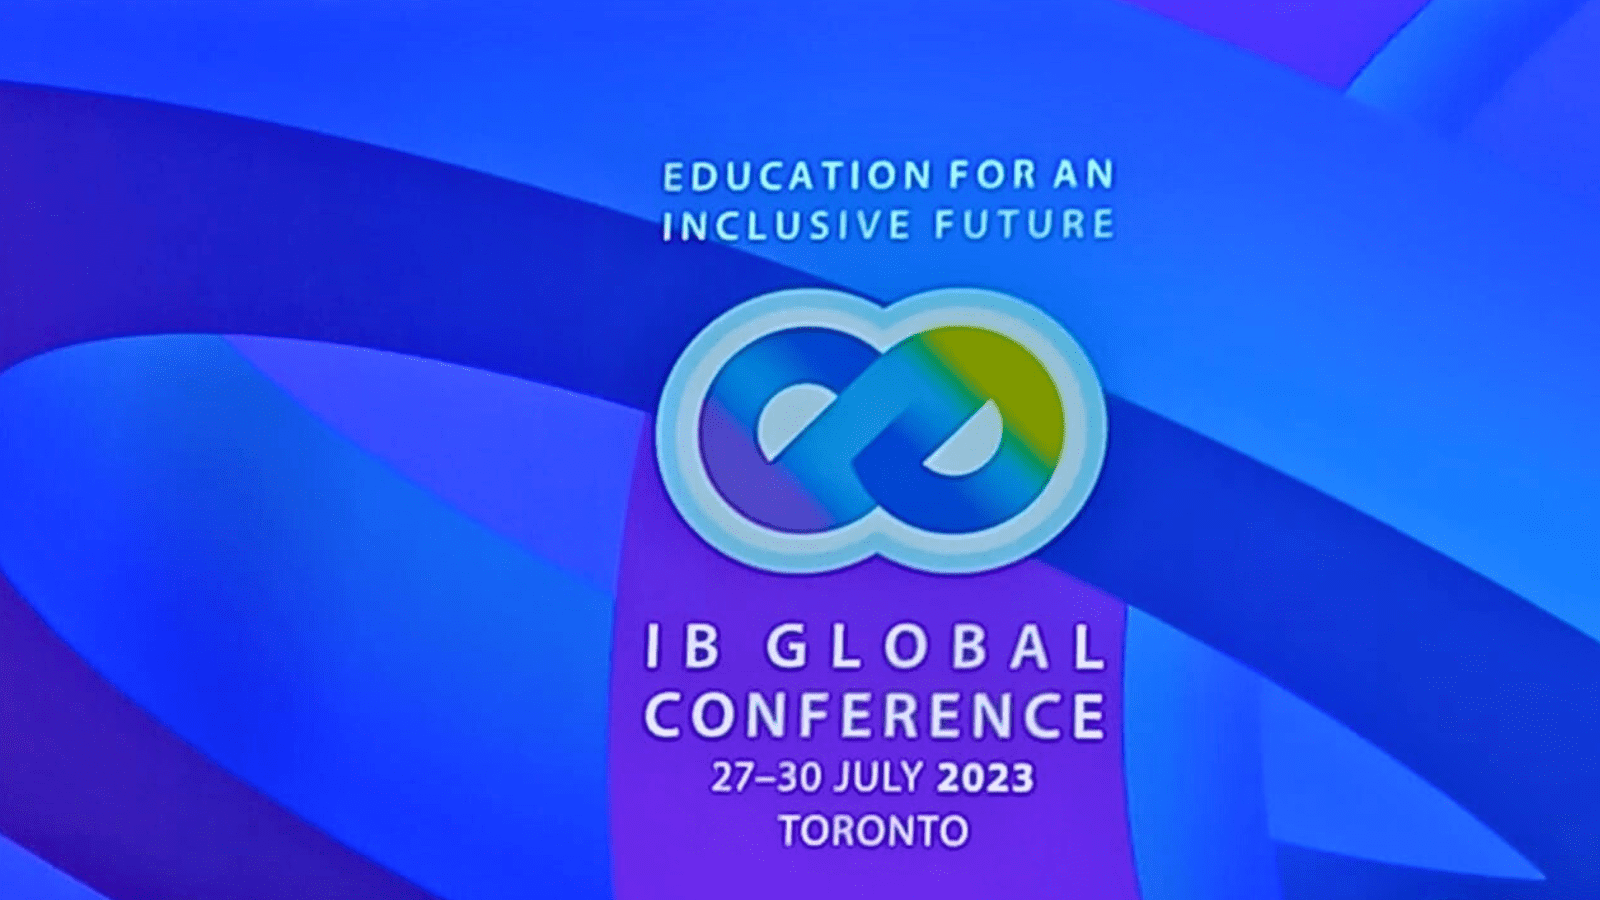 Building an Inclusive Future: Highlights from the IB Global Conference 2023  - IB Global Conference 2023